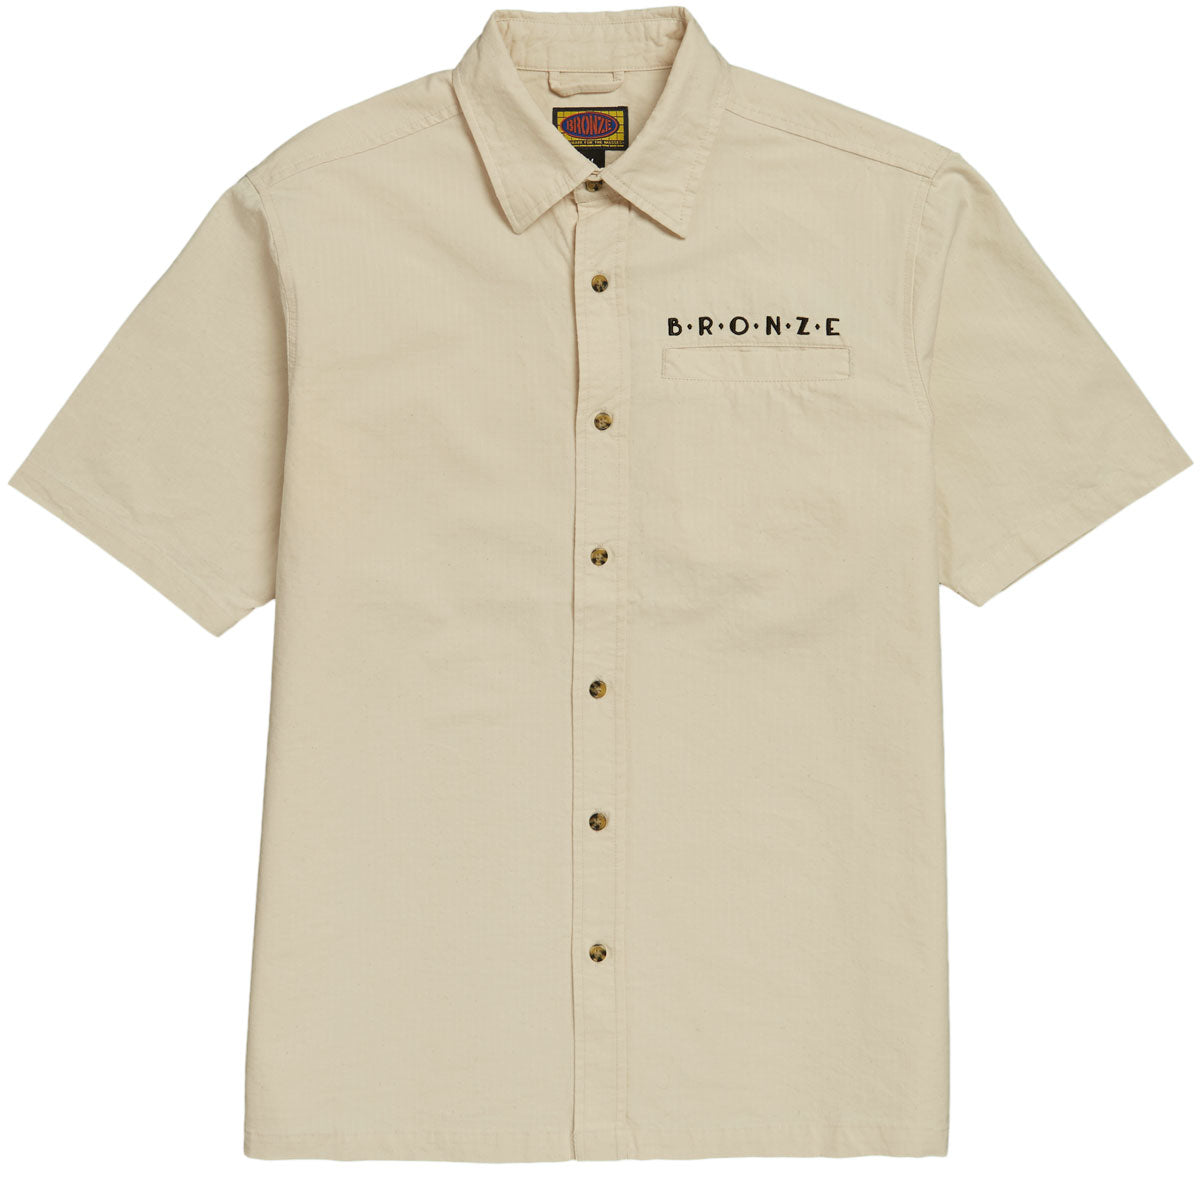 Bronze 56k Ripstop Button Up Shirt - Ivory image 1